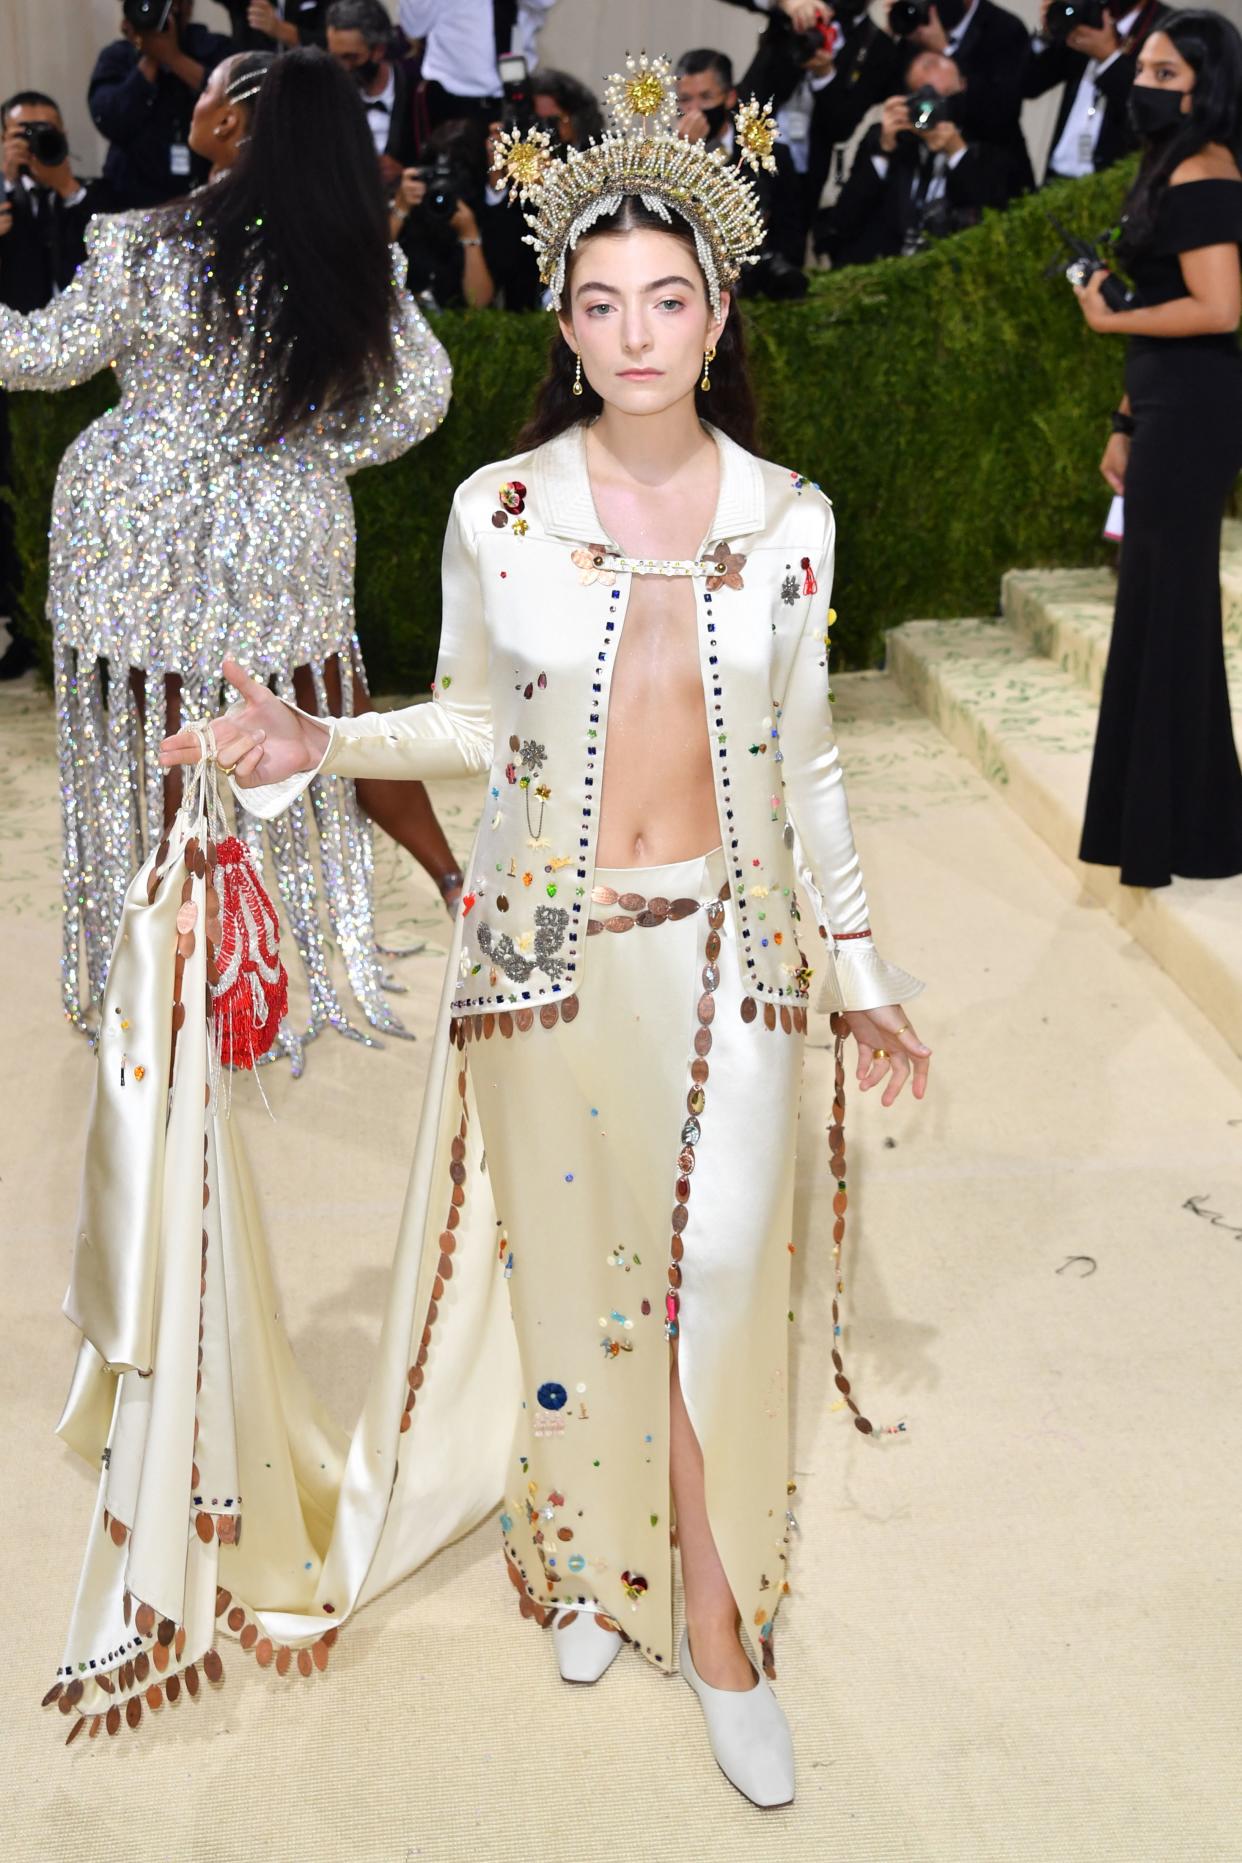 Lorde attends The 2021 Met Gala Celebrating In America: A Lexicon Of Fashion at Metropolitan Museum of Art on September 13, 2021 in New York City. (Getty Images)